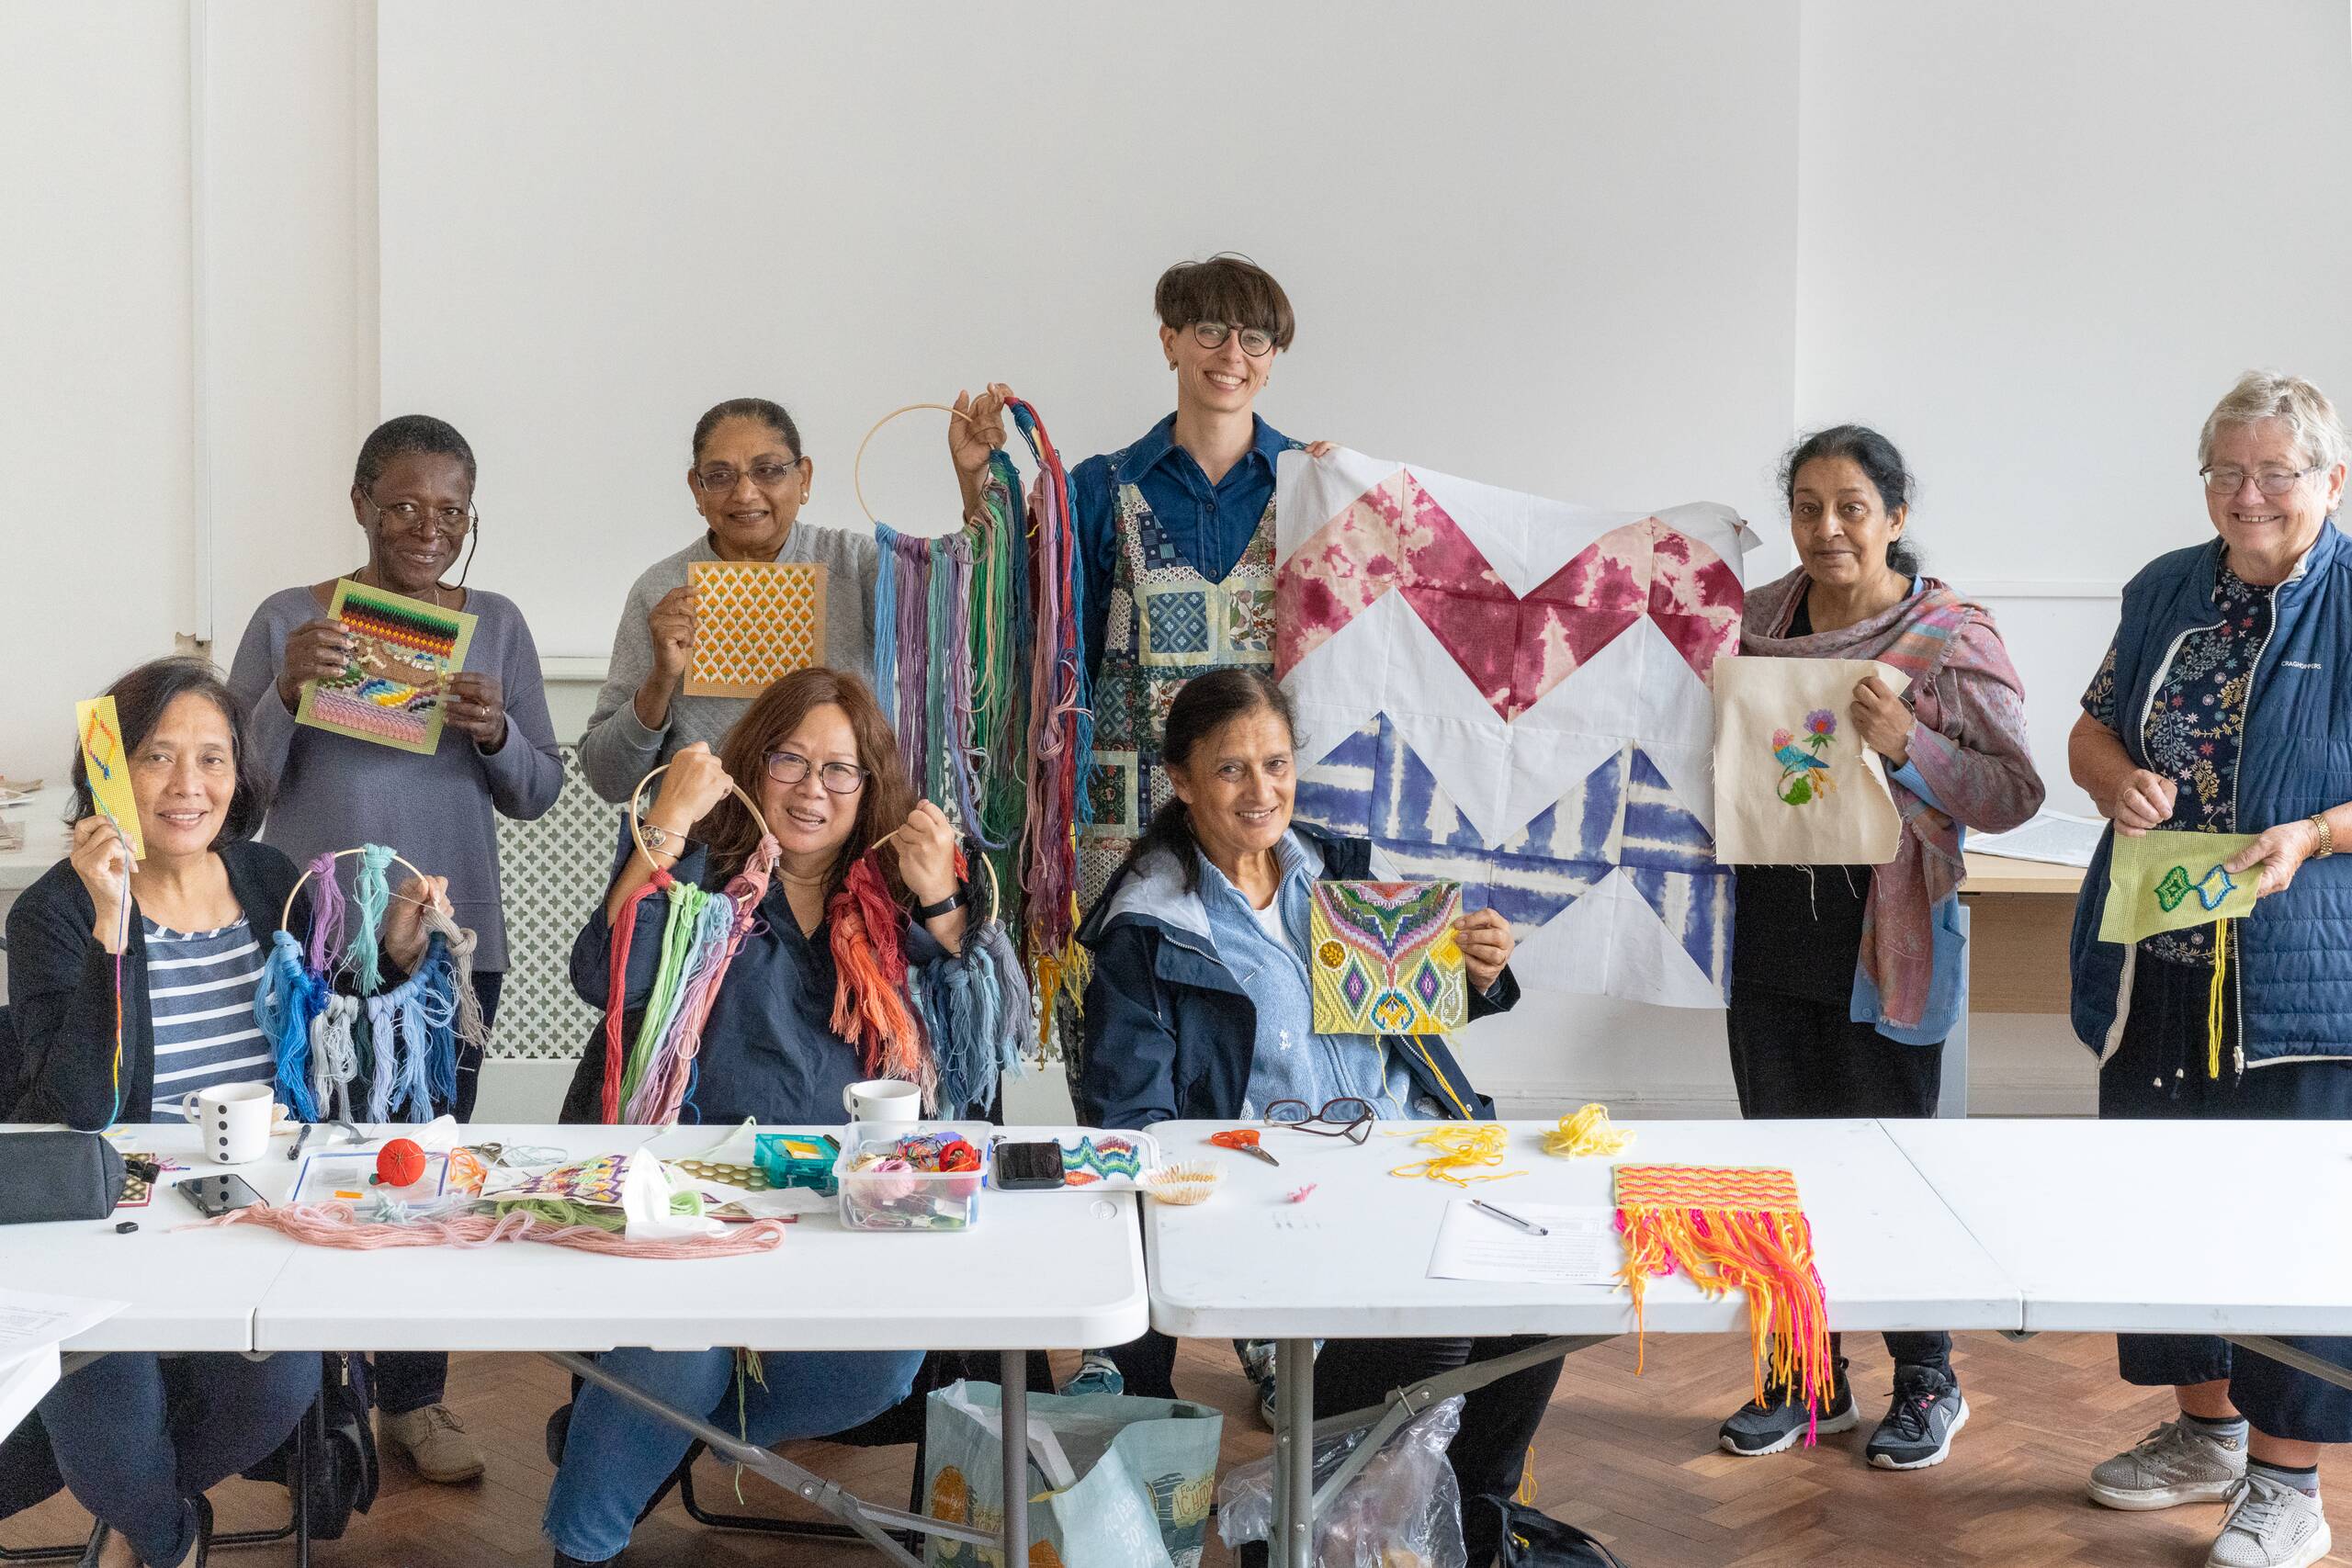 Mammoth Loop: A stitch in time, Series of 15 textile workshops with Redbridge Borough seniors, held at SPACE studios in collaboration with Age UK, London UK, 2021